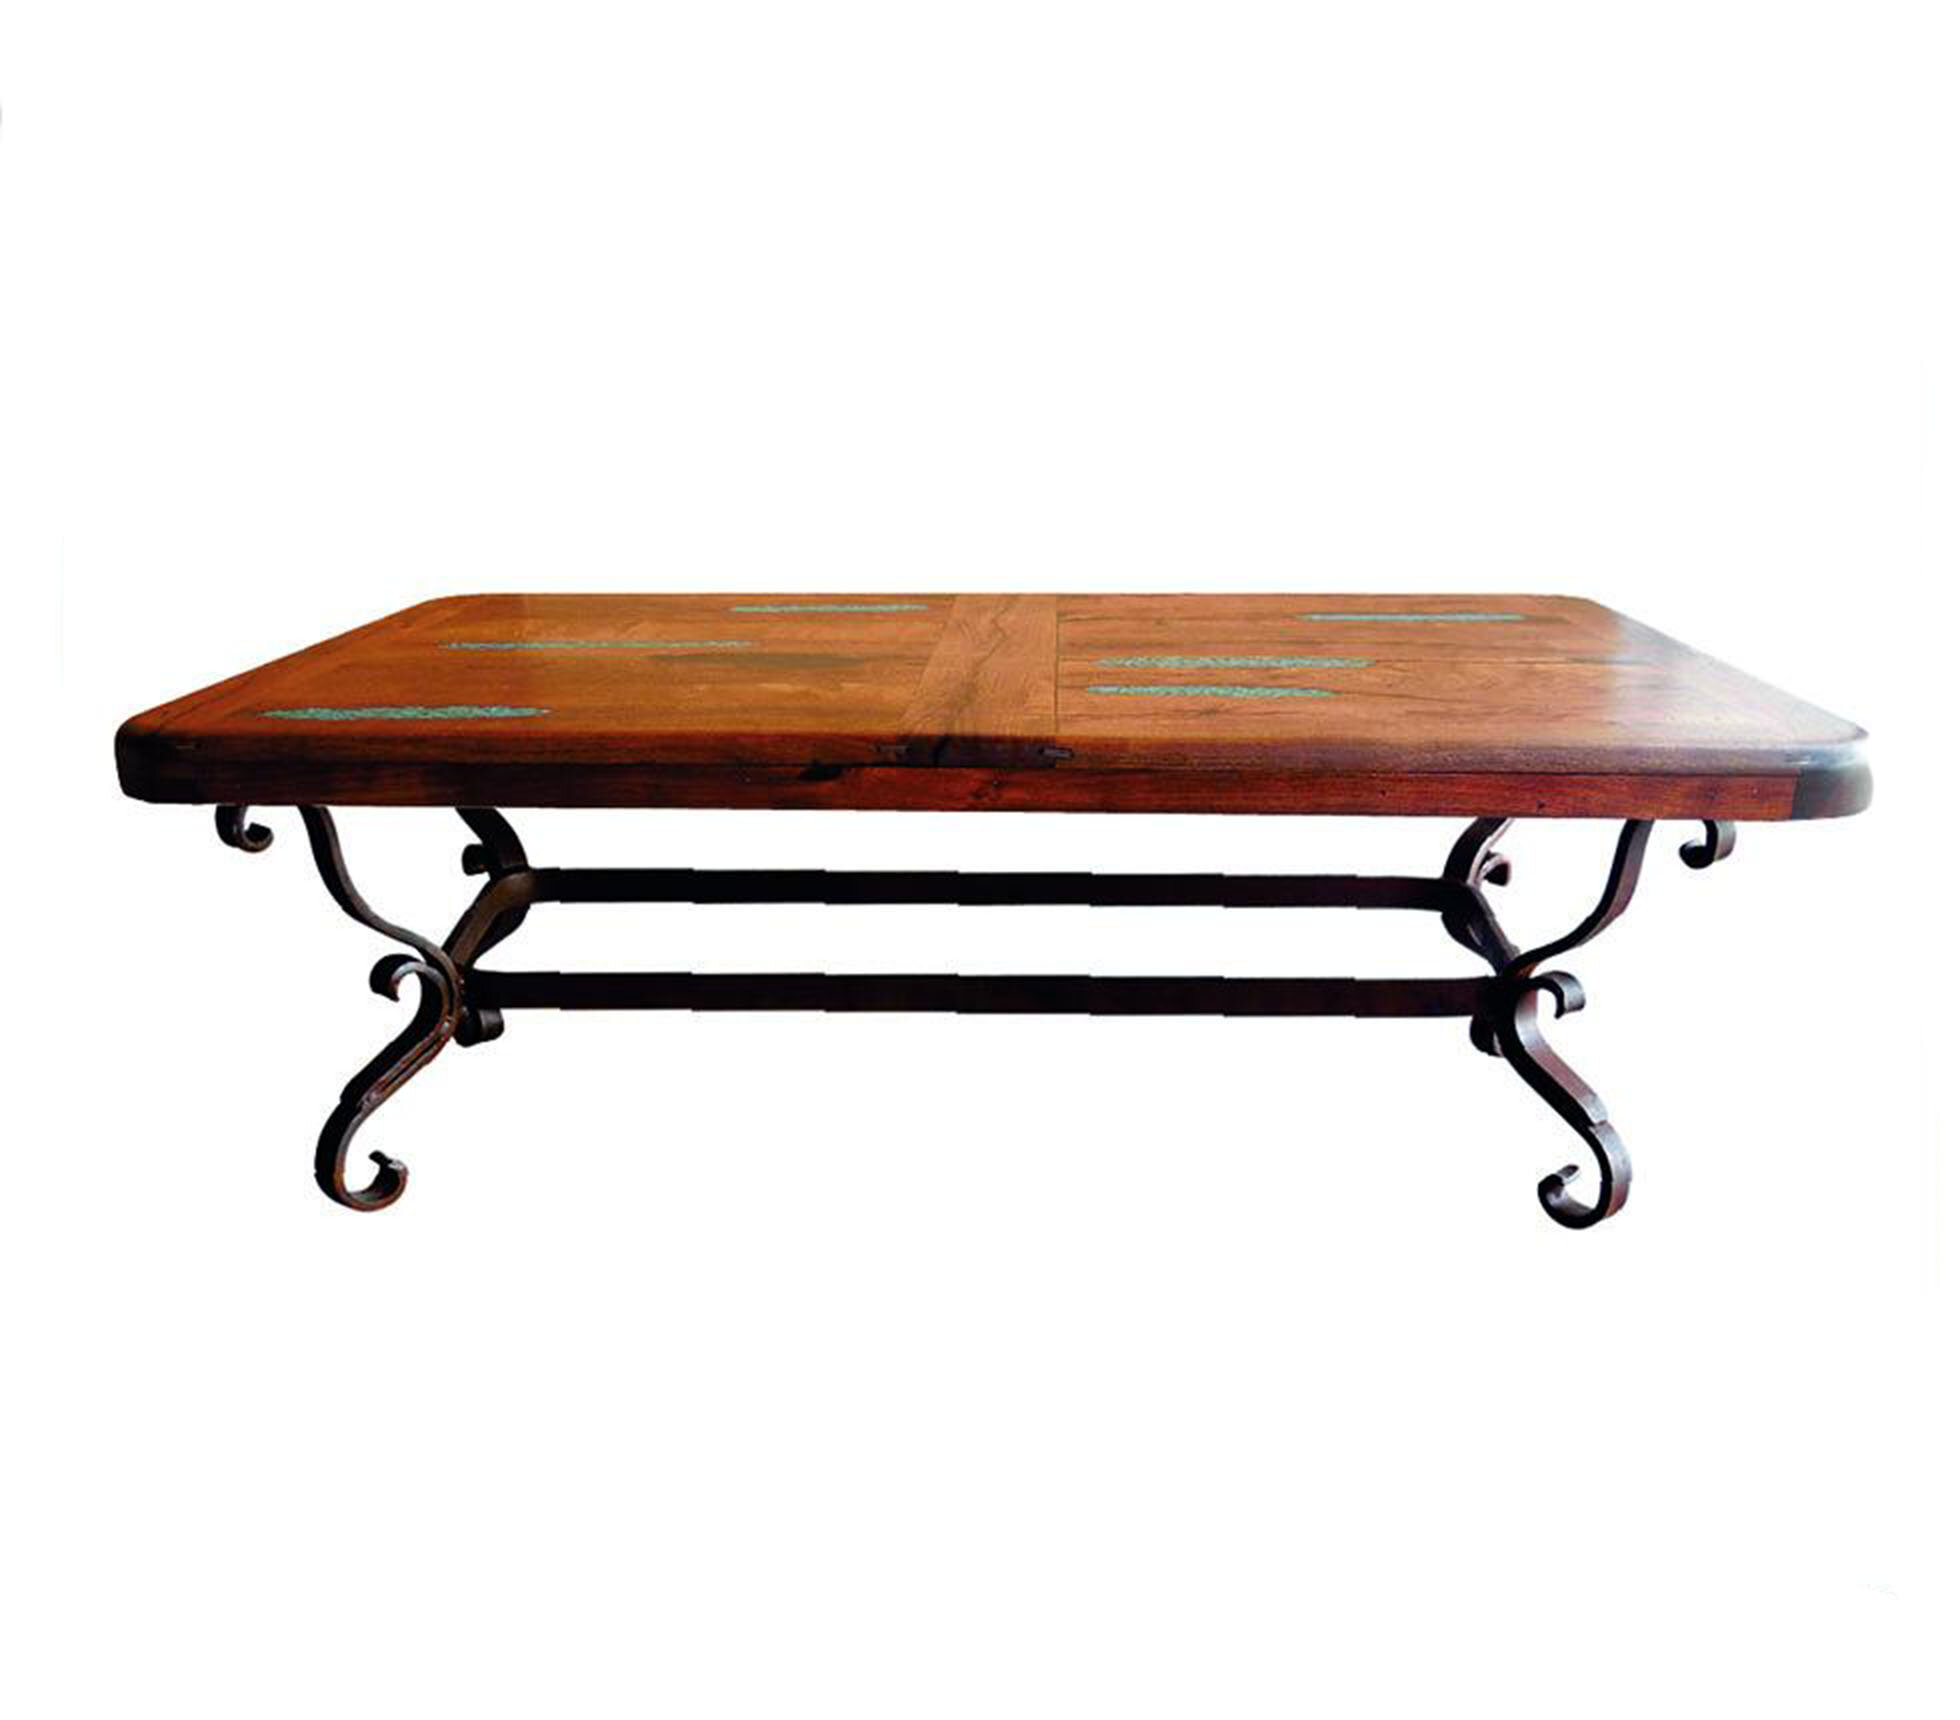 Mexports By Susana Molina Luxurious Wrought Iron Coffee Table With A Rectangular Mesquite Wood Top Embellished With Turquoise Inlay 60 X 32 Wayfair